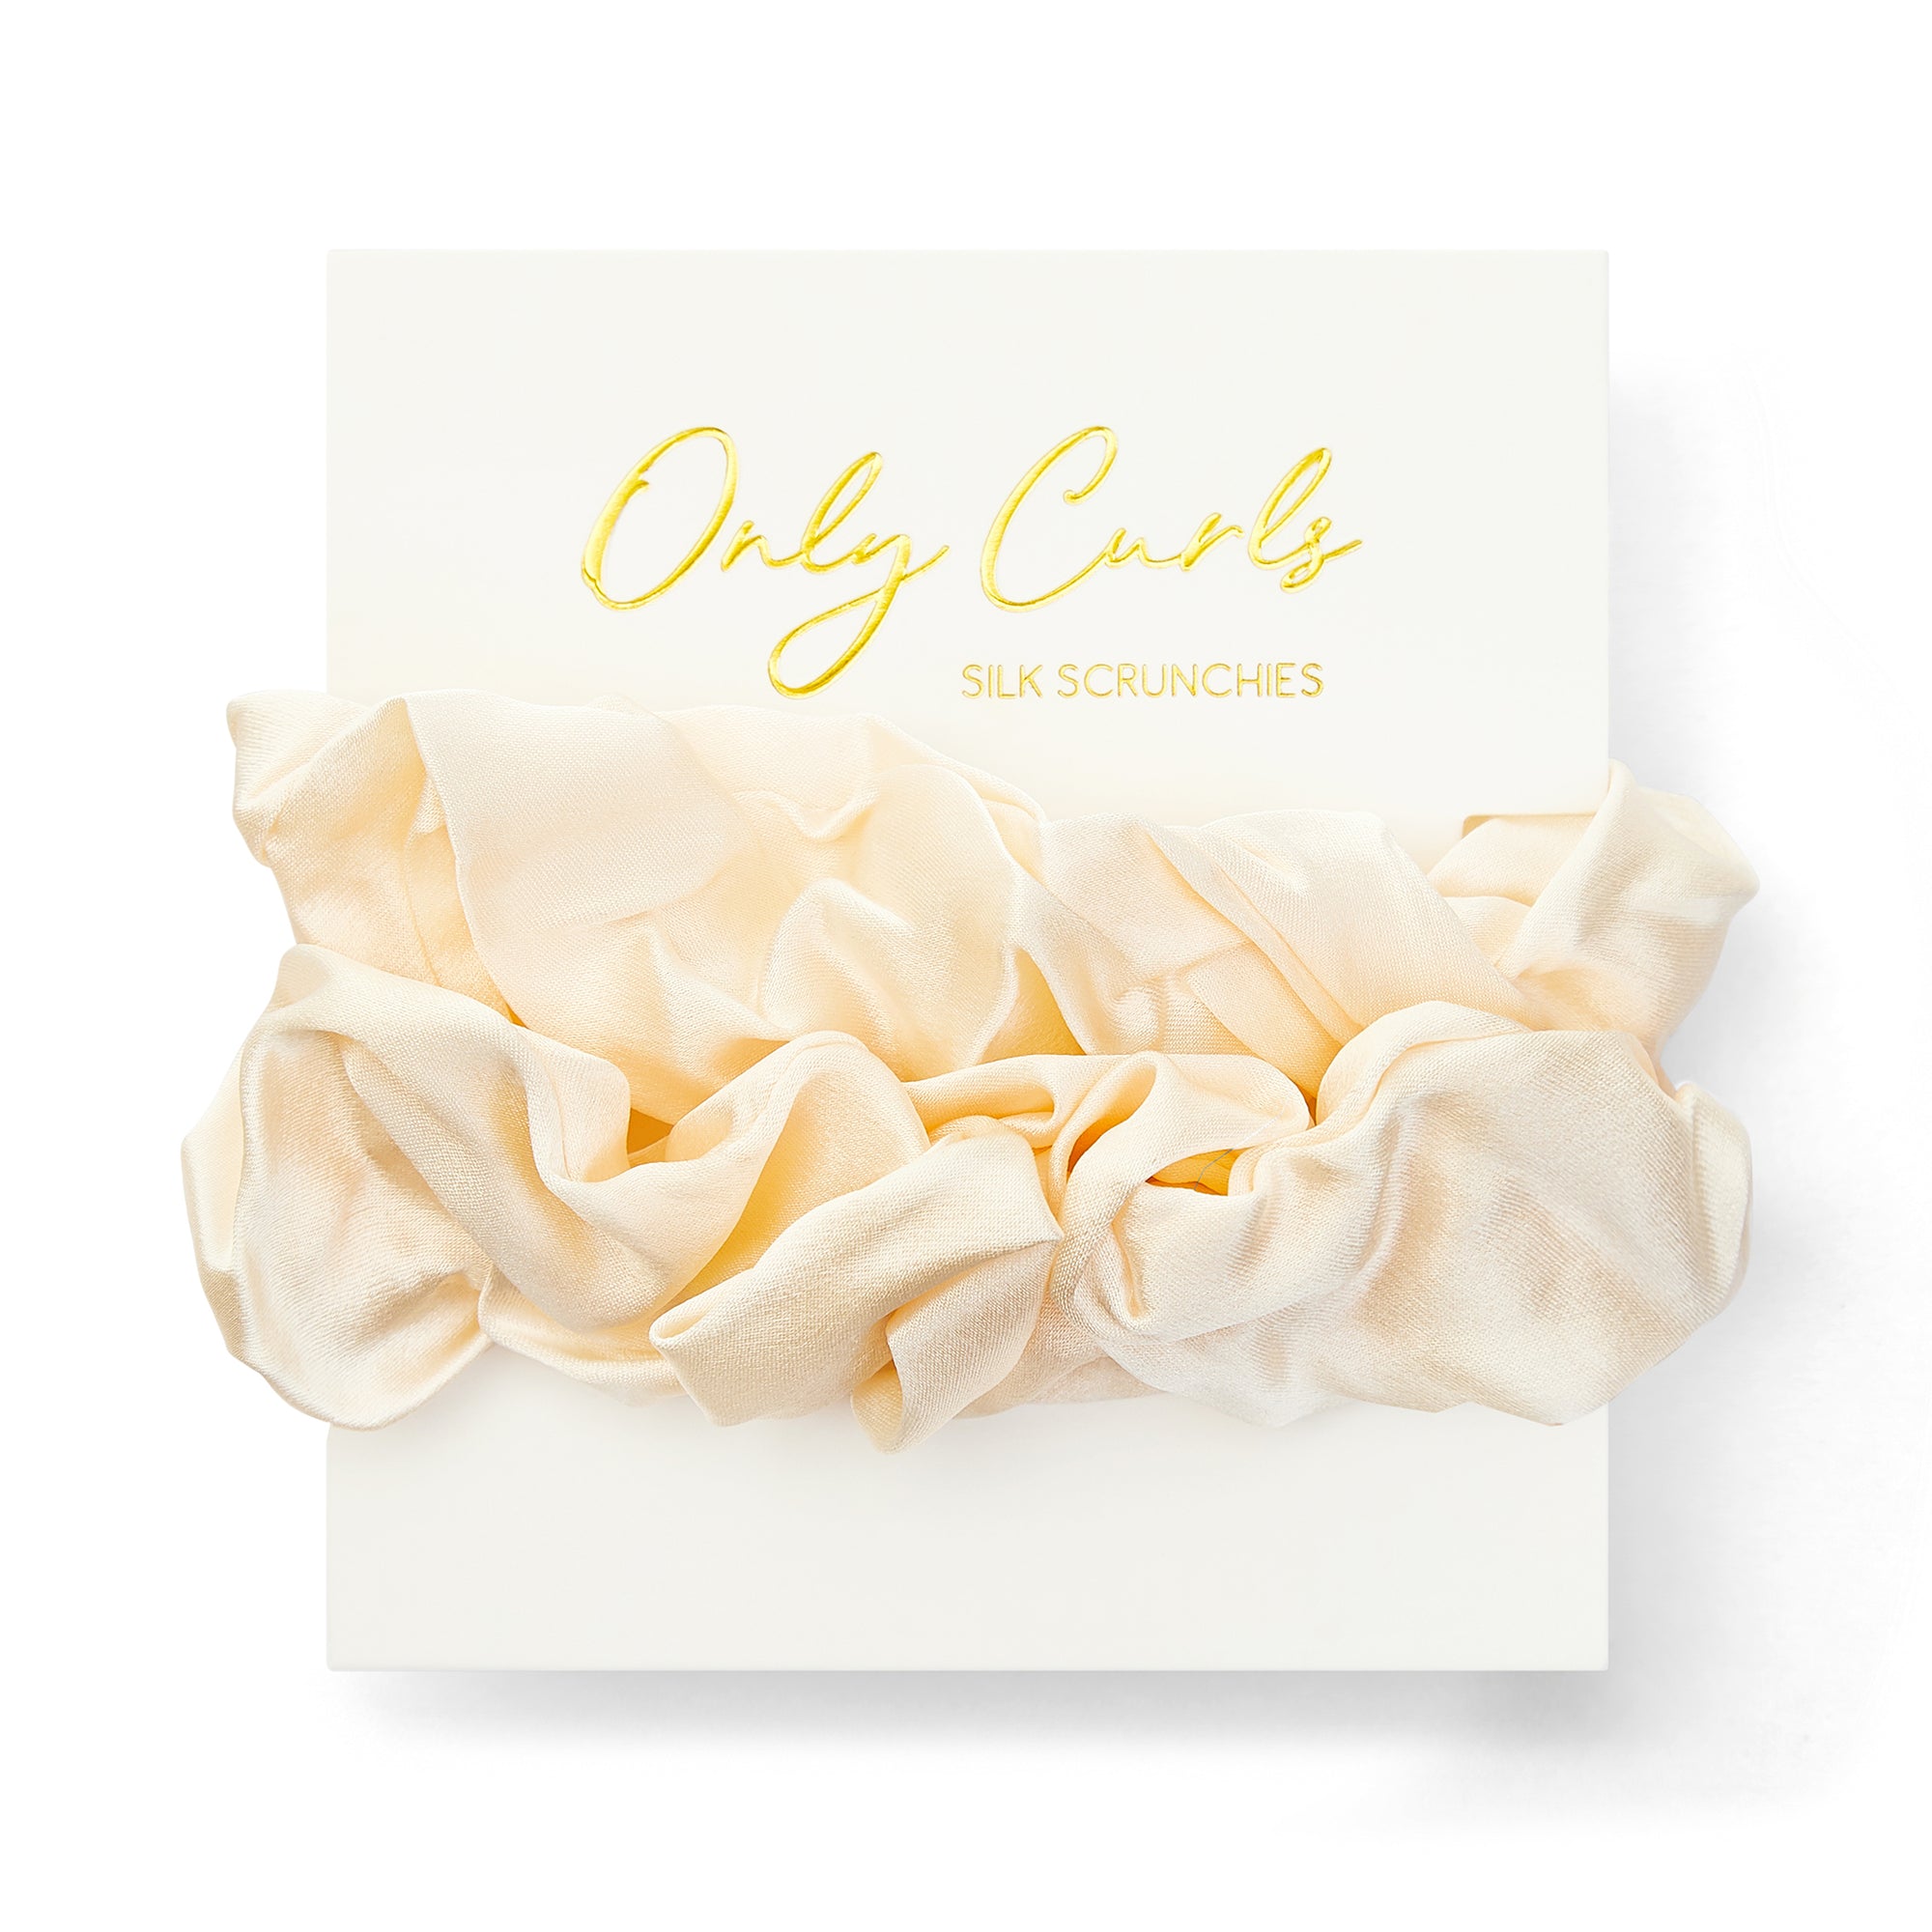 Only Curls Silk Scrunchies Ivory - Only Curls